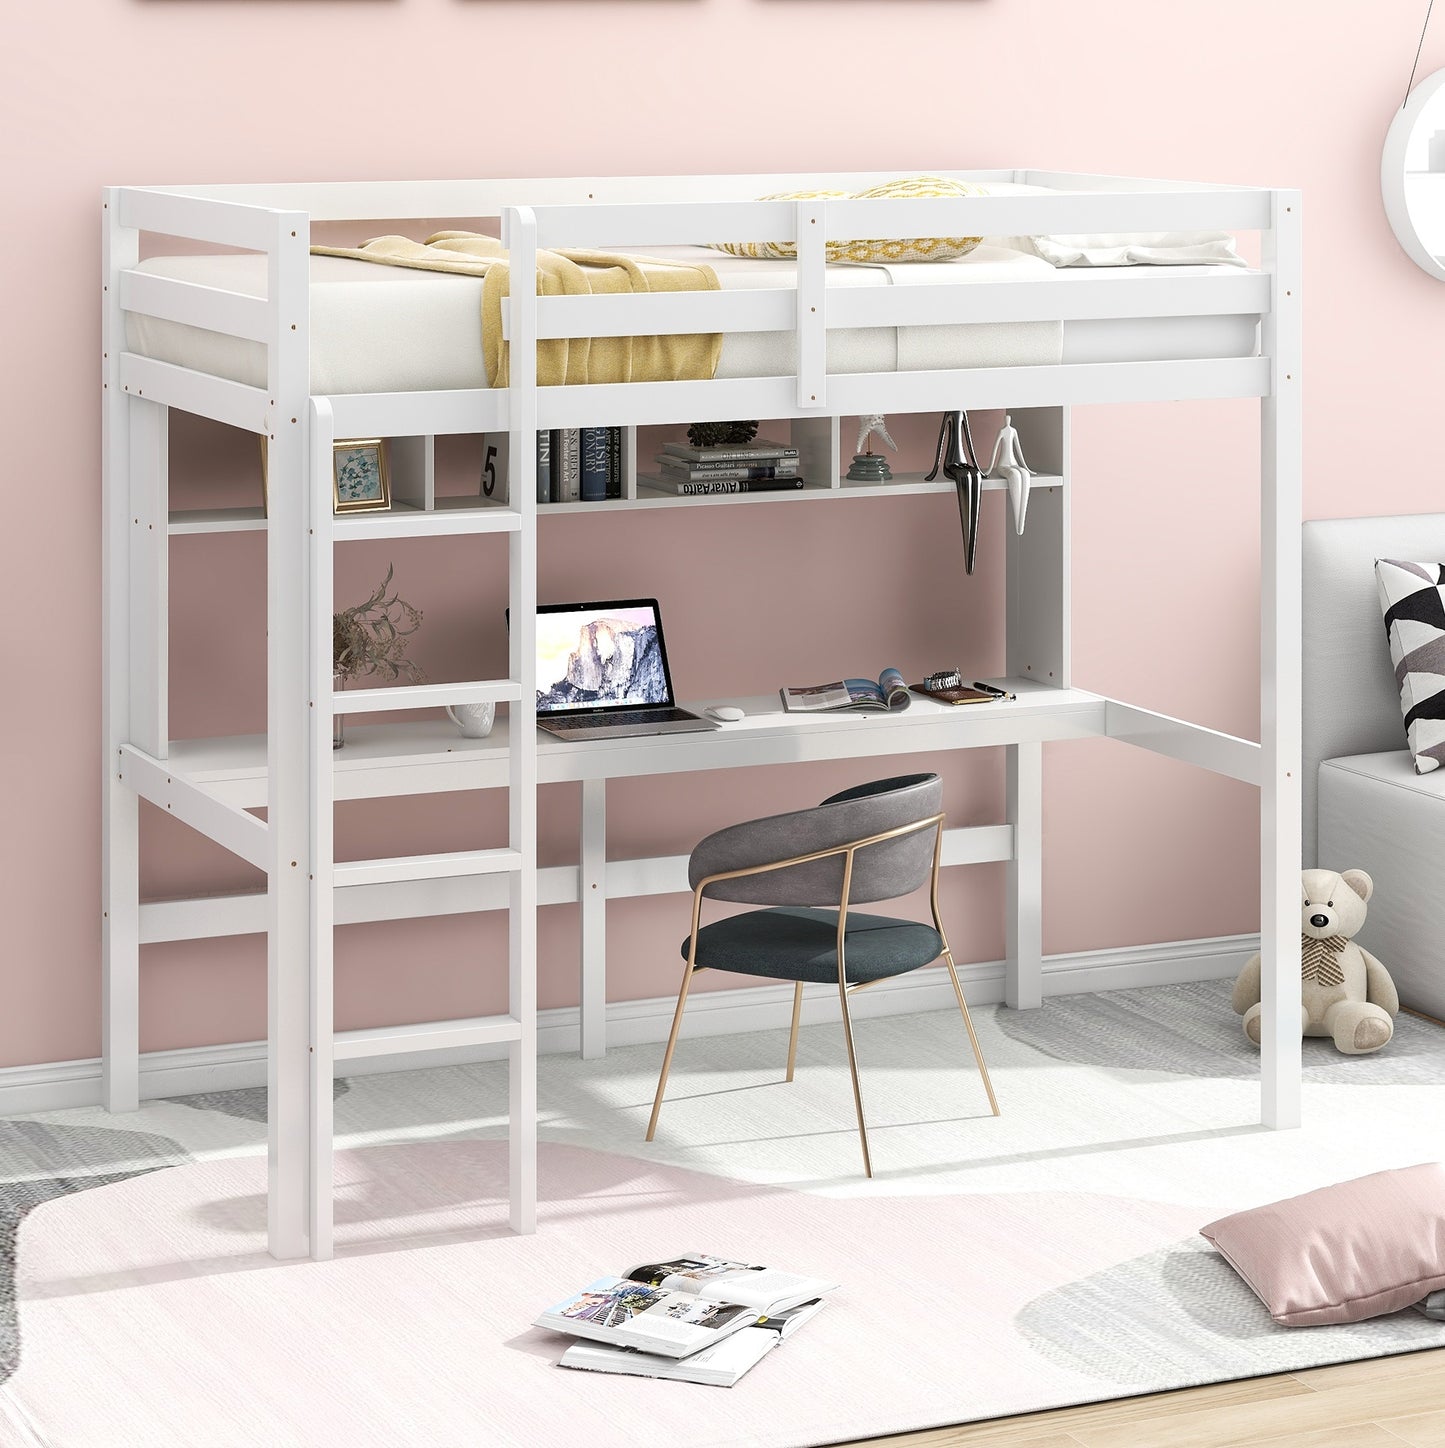 Loft Bed with Desk for Kids, Solid Pine Wood Twin Loft Bunk Bed Frame with Ladder and Built-in Desk for Boys Girls Teens Adults, No Box Spring Needed, White, LJ647